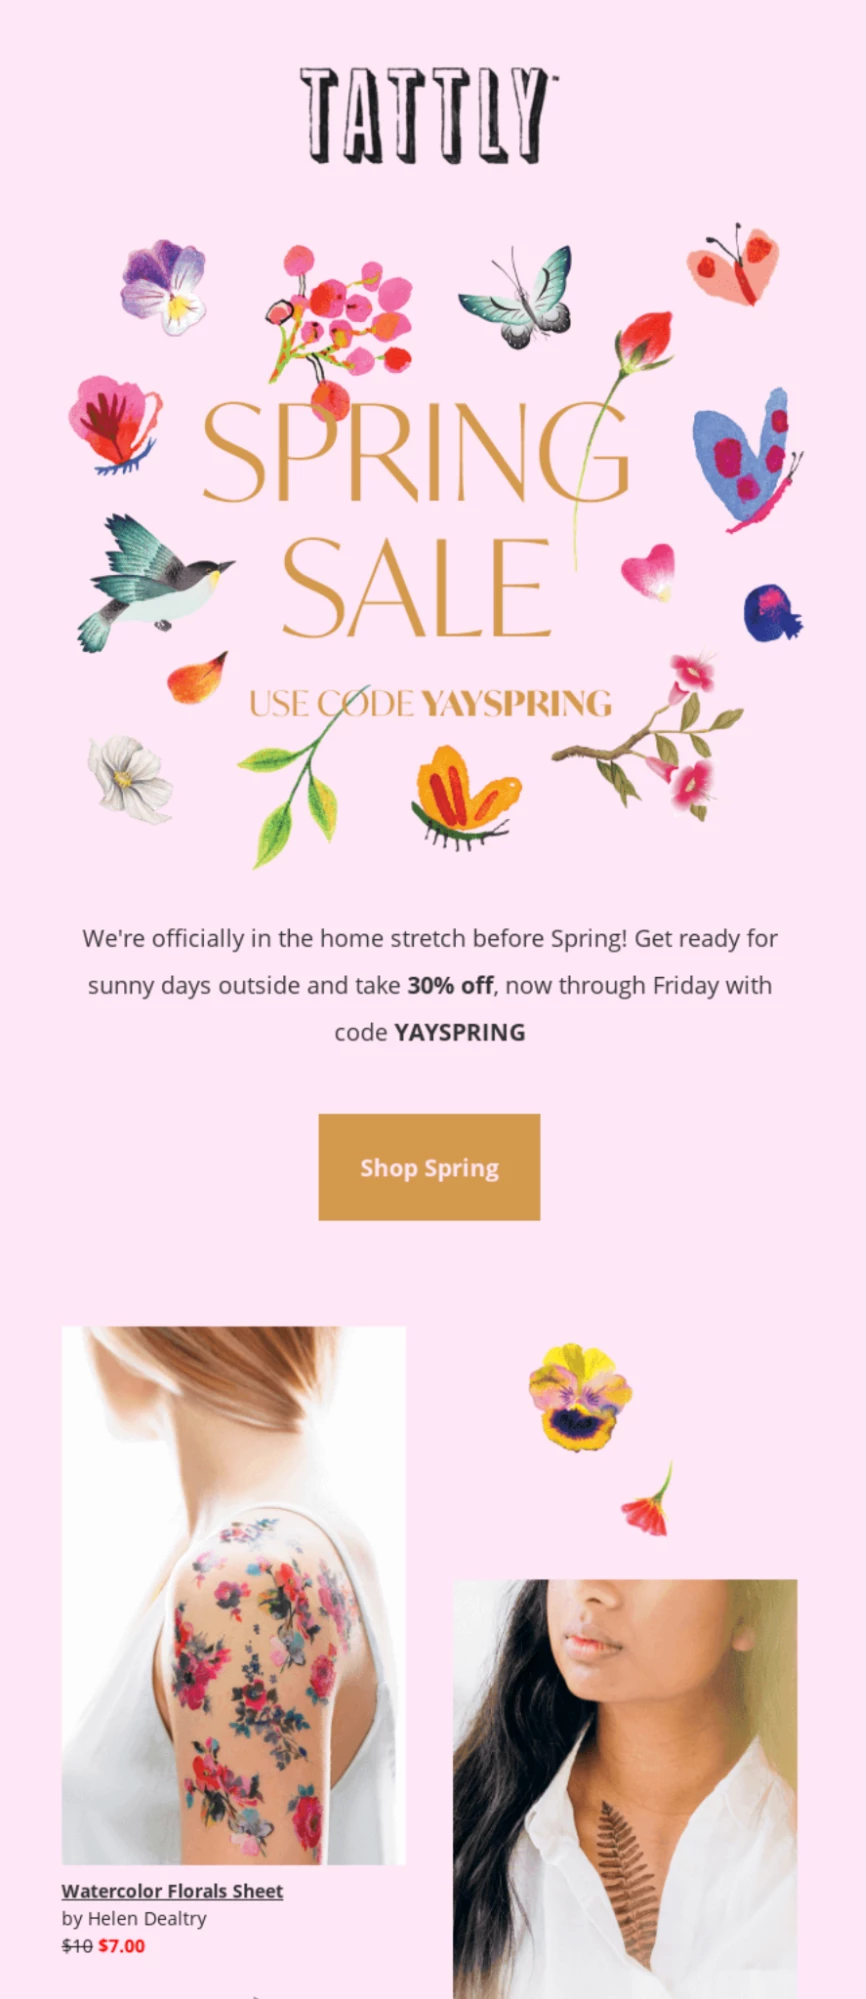 Spring sale newsletter from Tattly